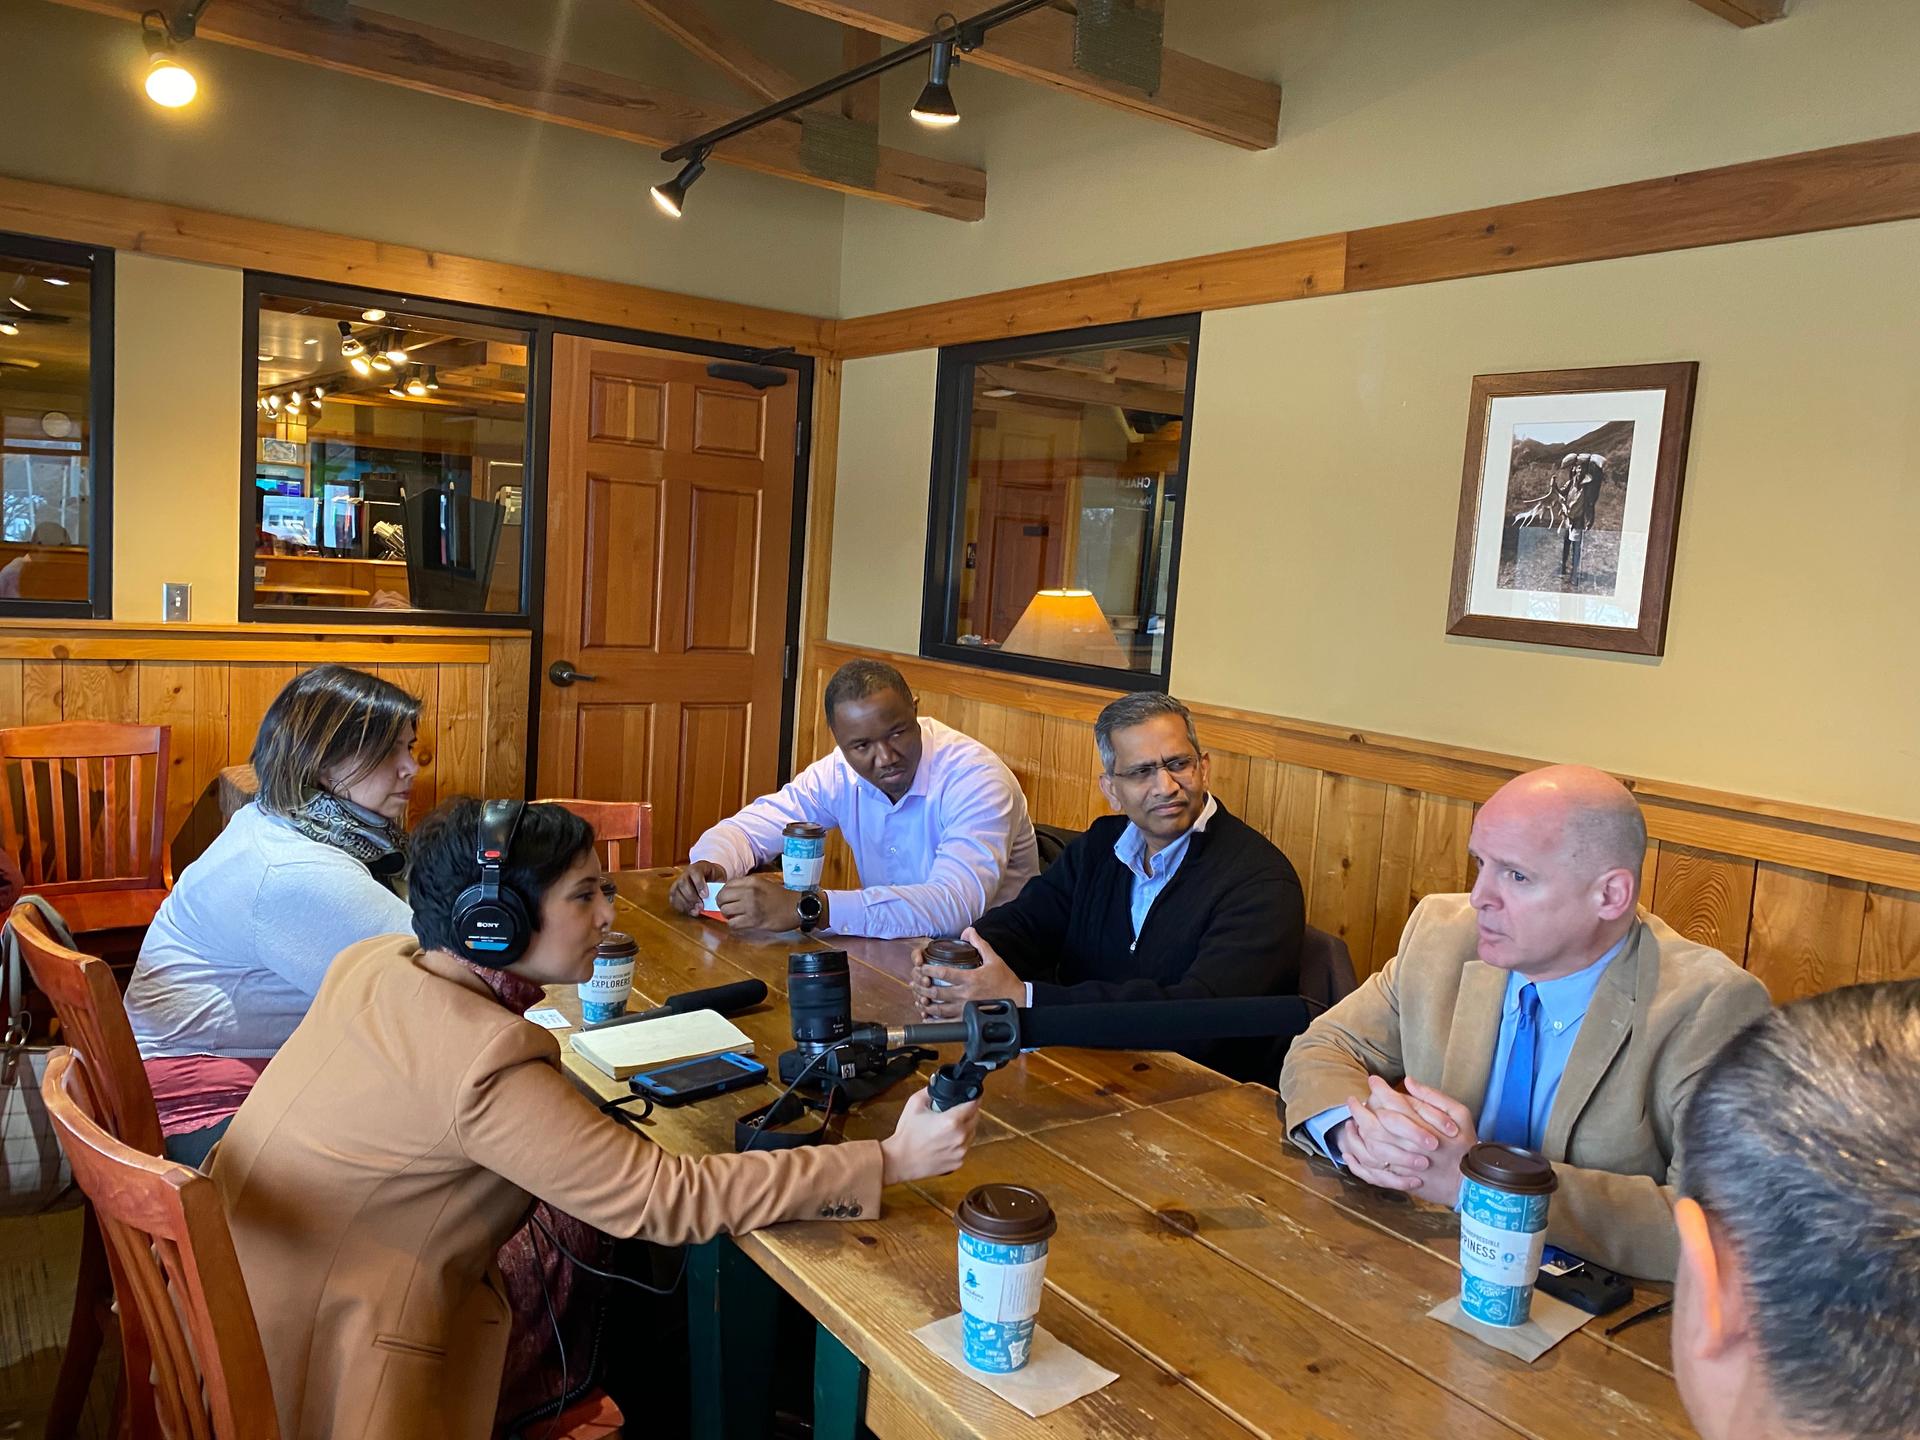 Reporter Rupa Shenoy meets with politically active immigrants and refugees in the back conference room of a Caribou Coffee in Des Moines.